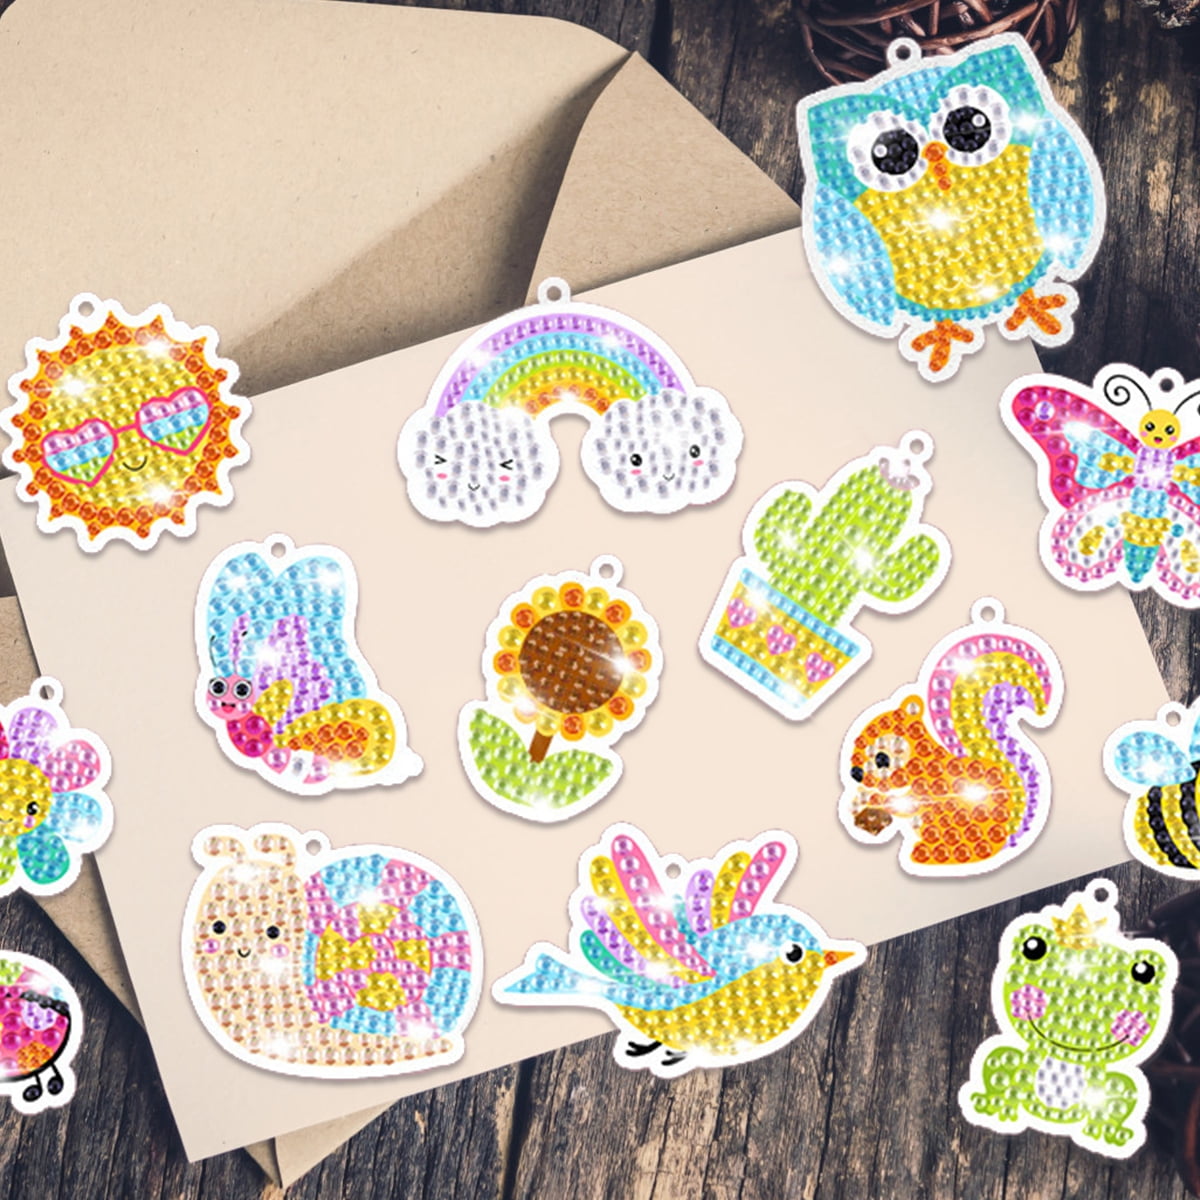 16 Pcs 5D Diamond Art Painting Stickers Kits Stitch Arts and Crafts for  Kids Ages 6-12 Easy to DIY Creative Diamond Mosaic Sticker Craft by Numbers